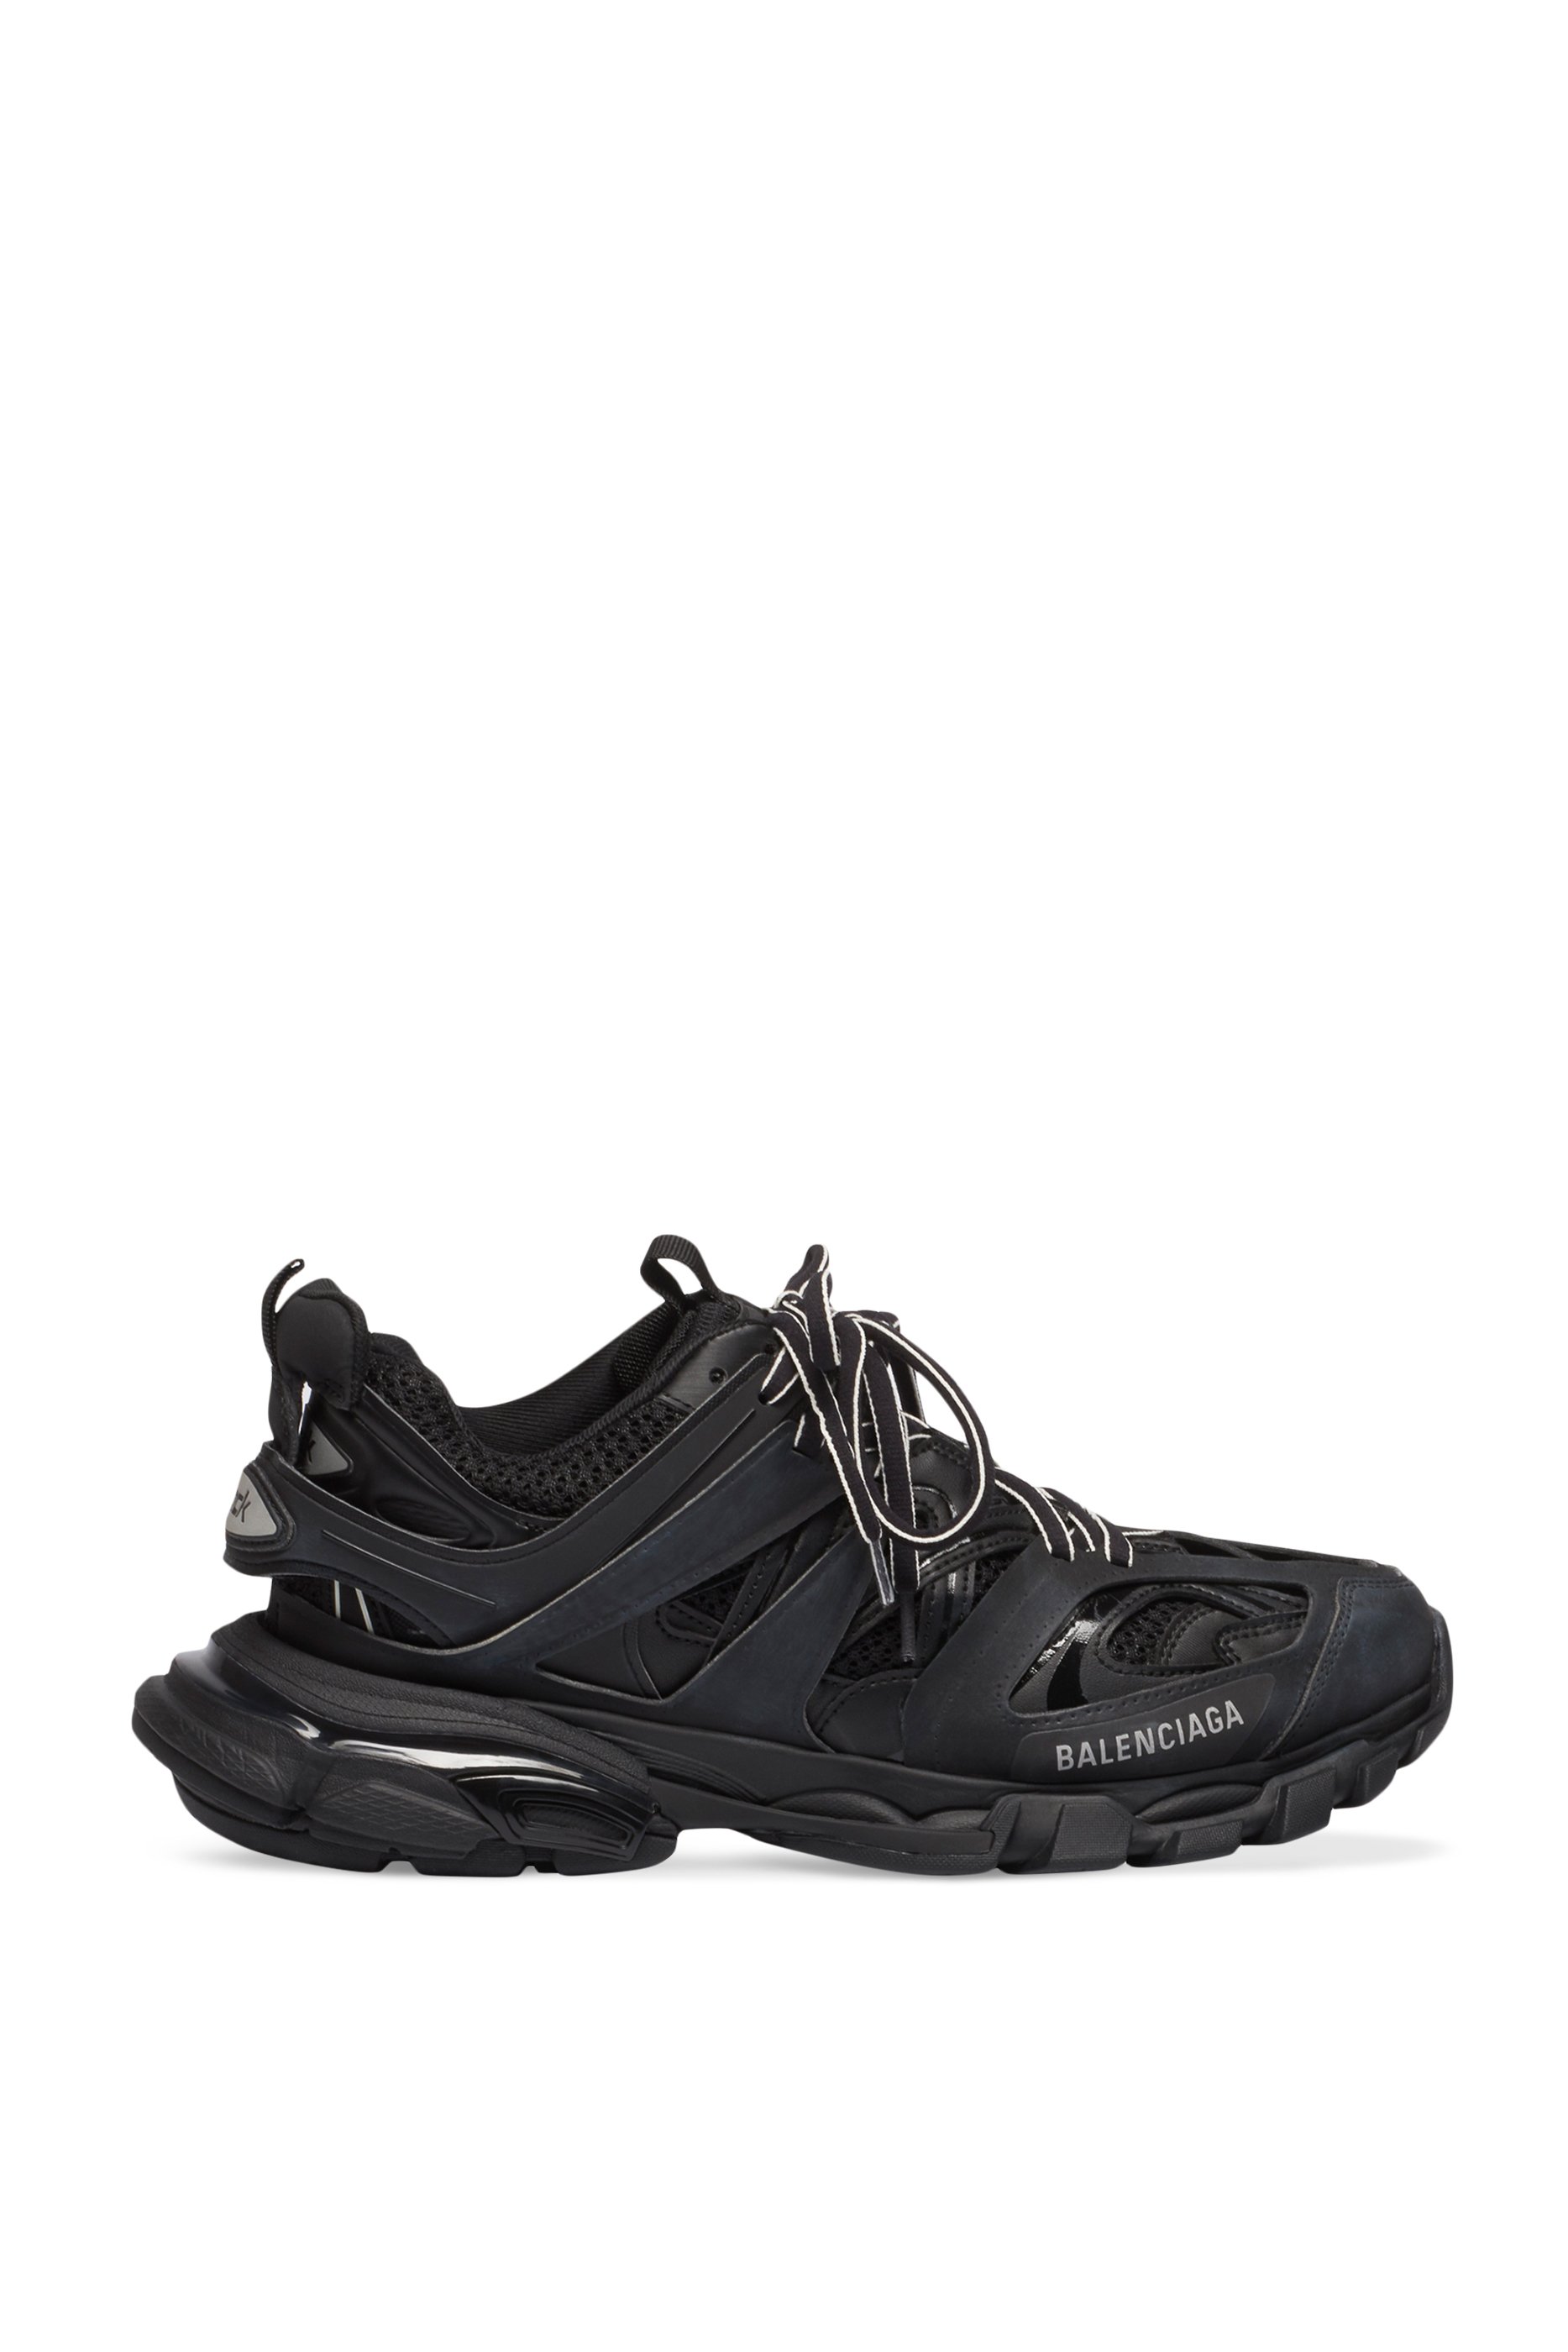 Buy Balenciaga Track Running Sneakers for Womens | Bloomingdale's Kuwait